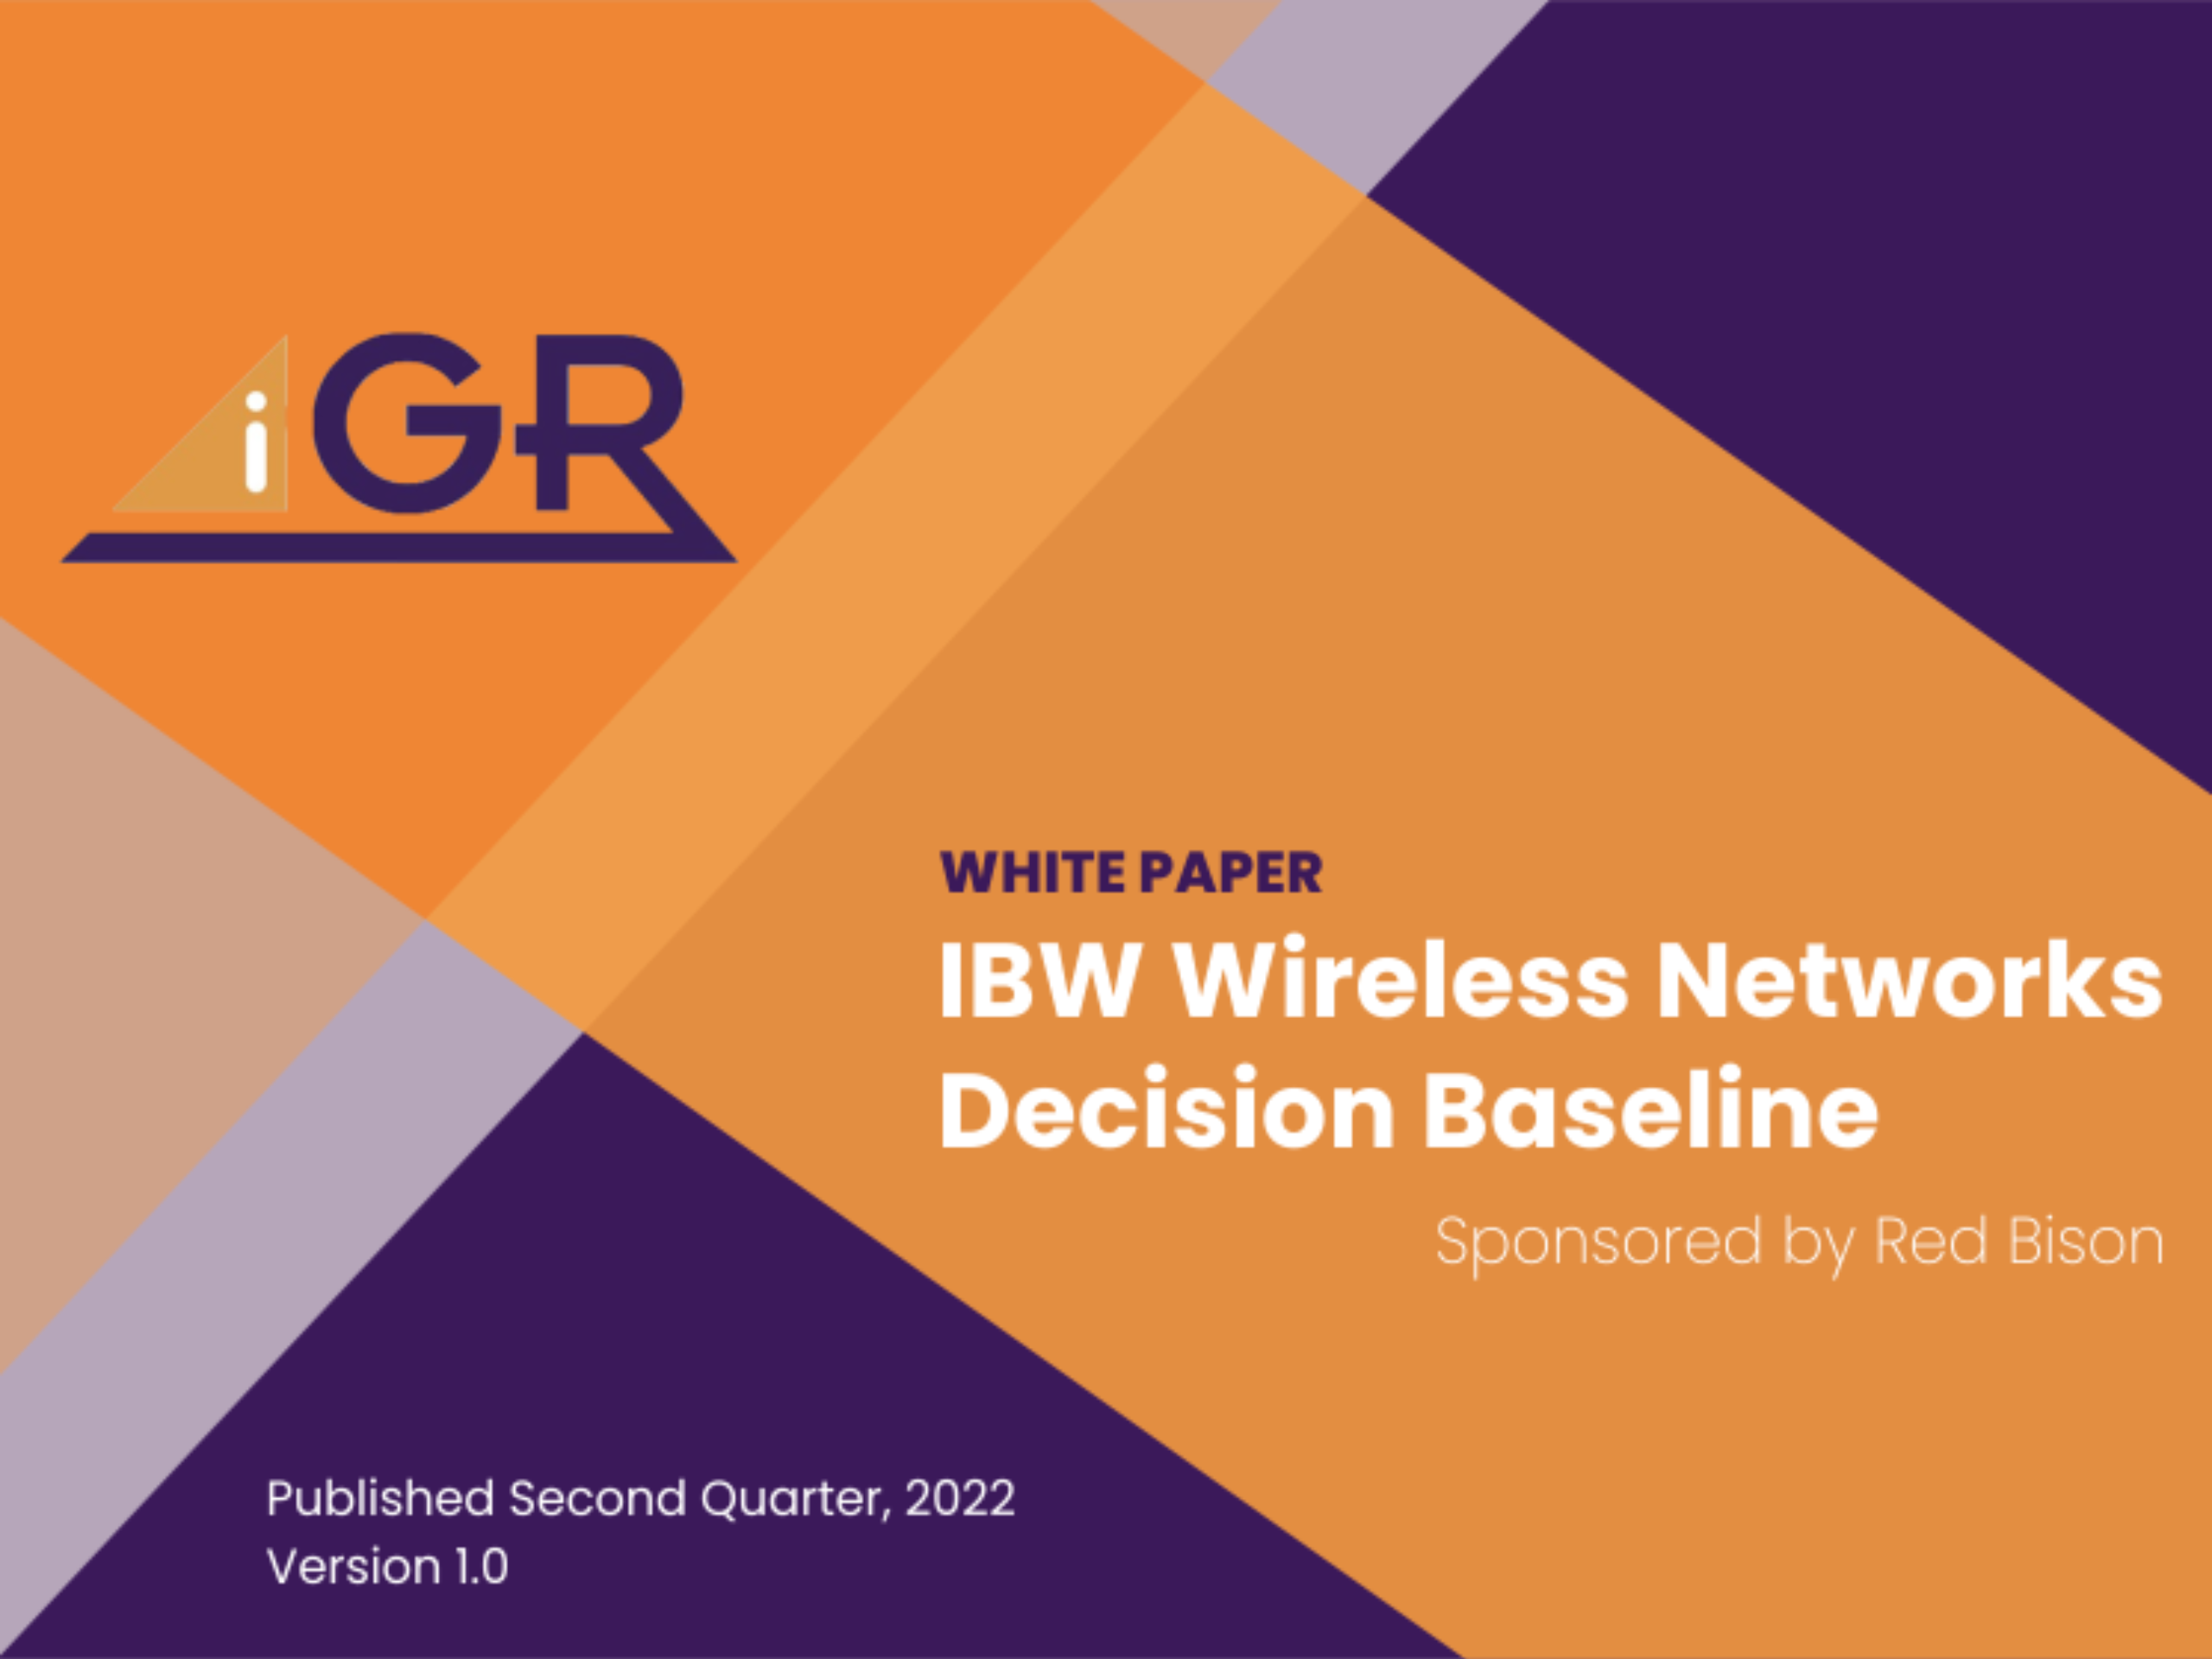 Text: 'Whitepaper IBW Wireless Networks Decision Baseline'